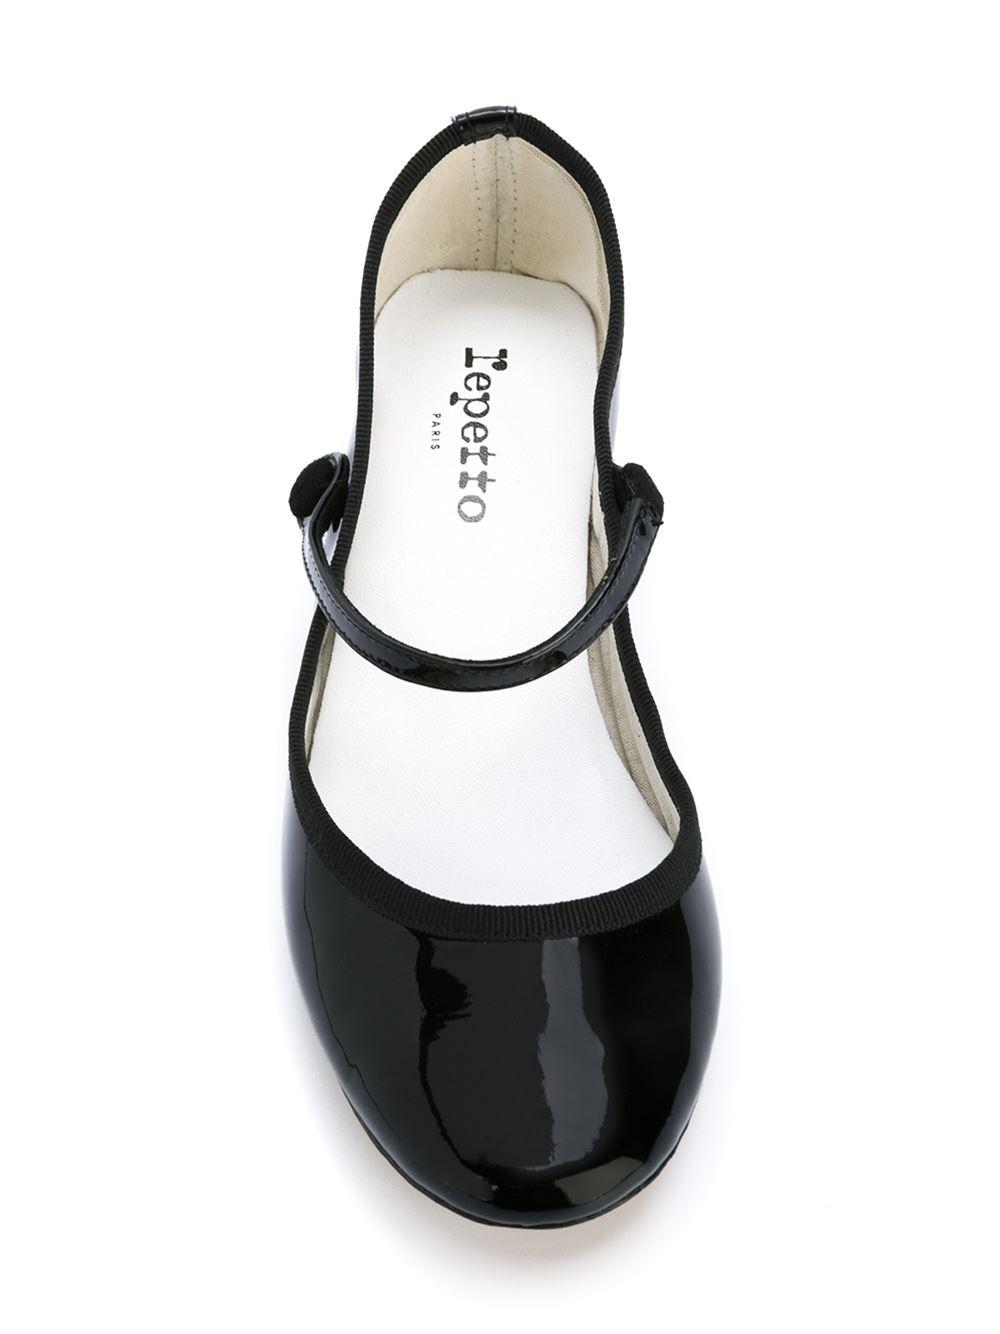 mere og mere Blive gift nabo Repetto Leather 'rose' Mary Jane Pumps in Black - Lyst